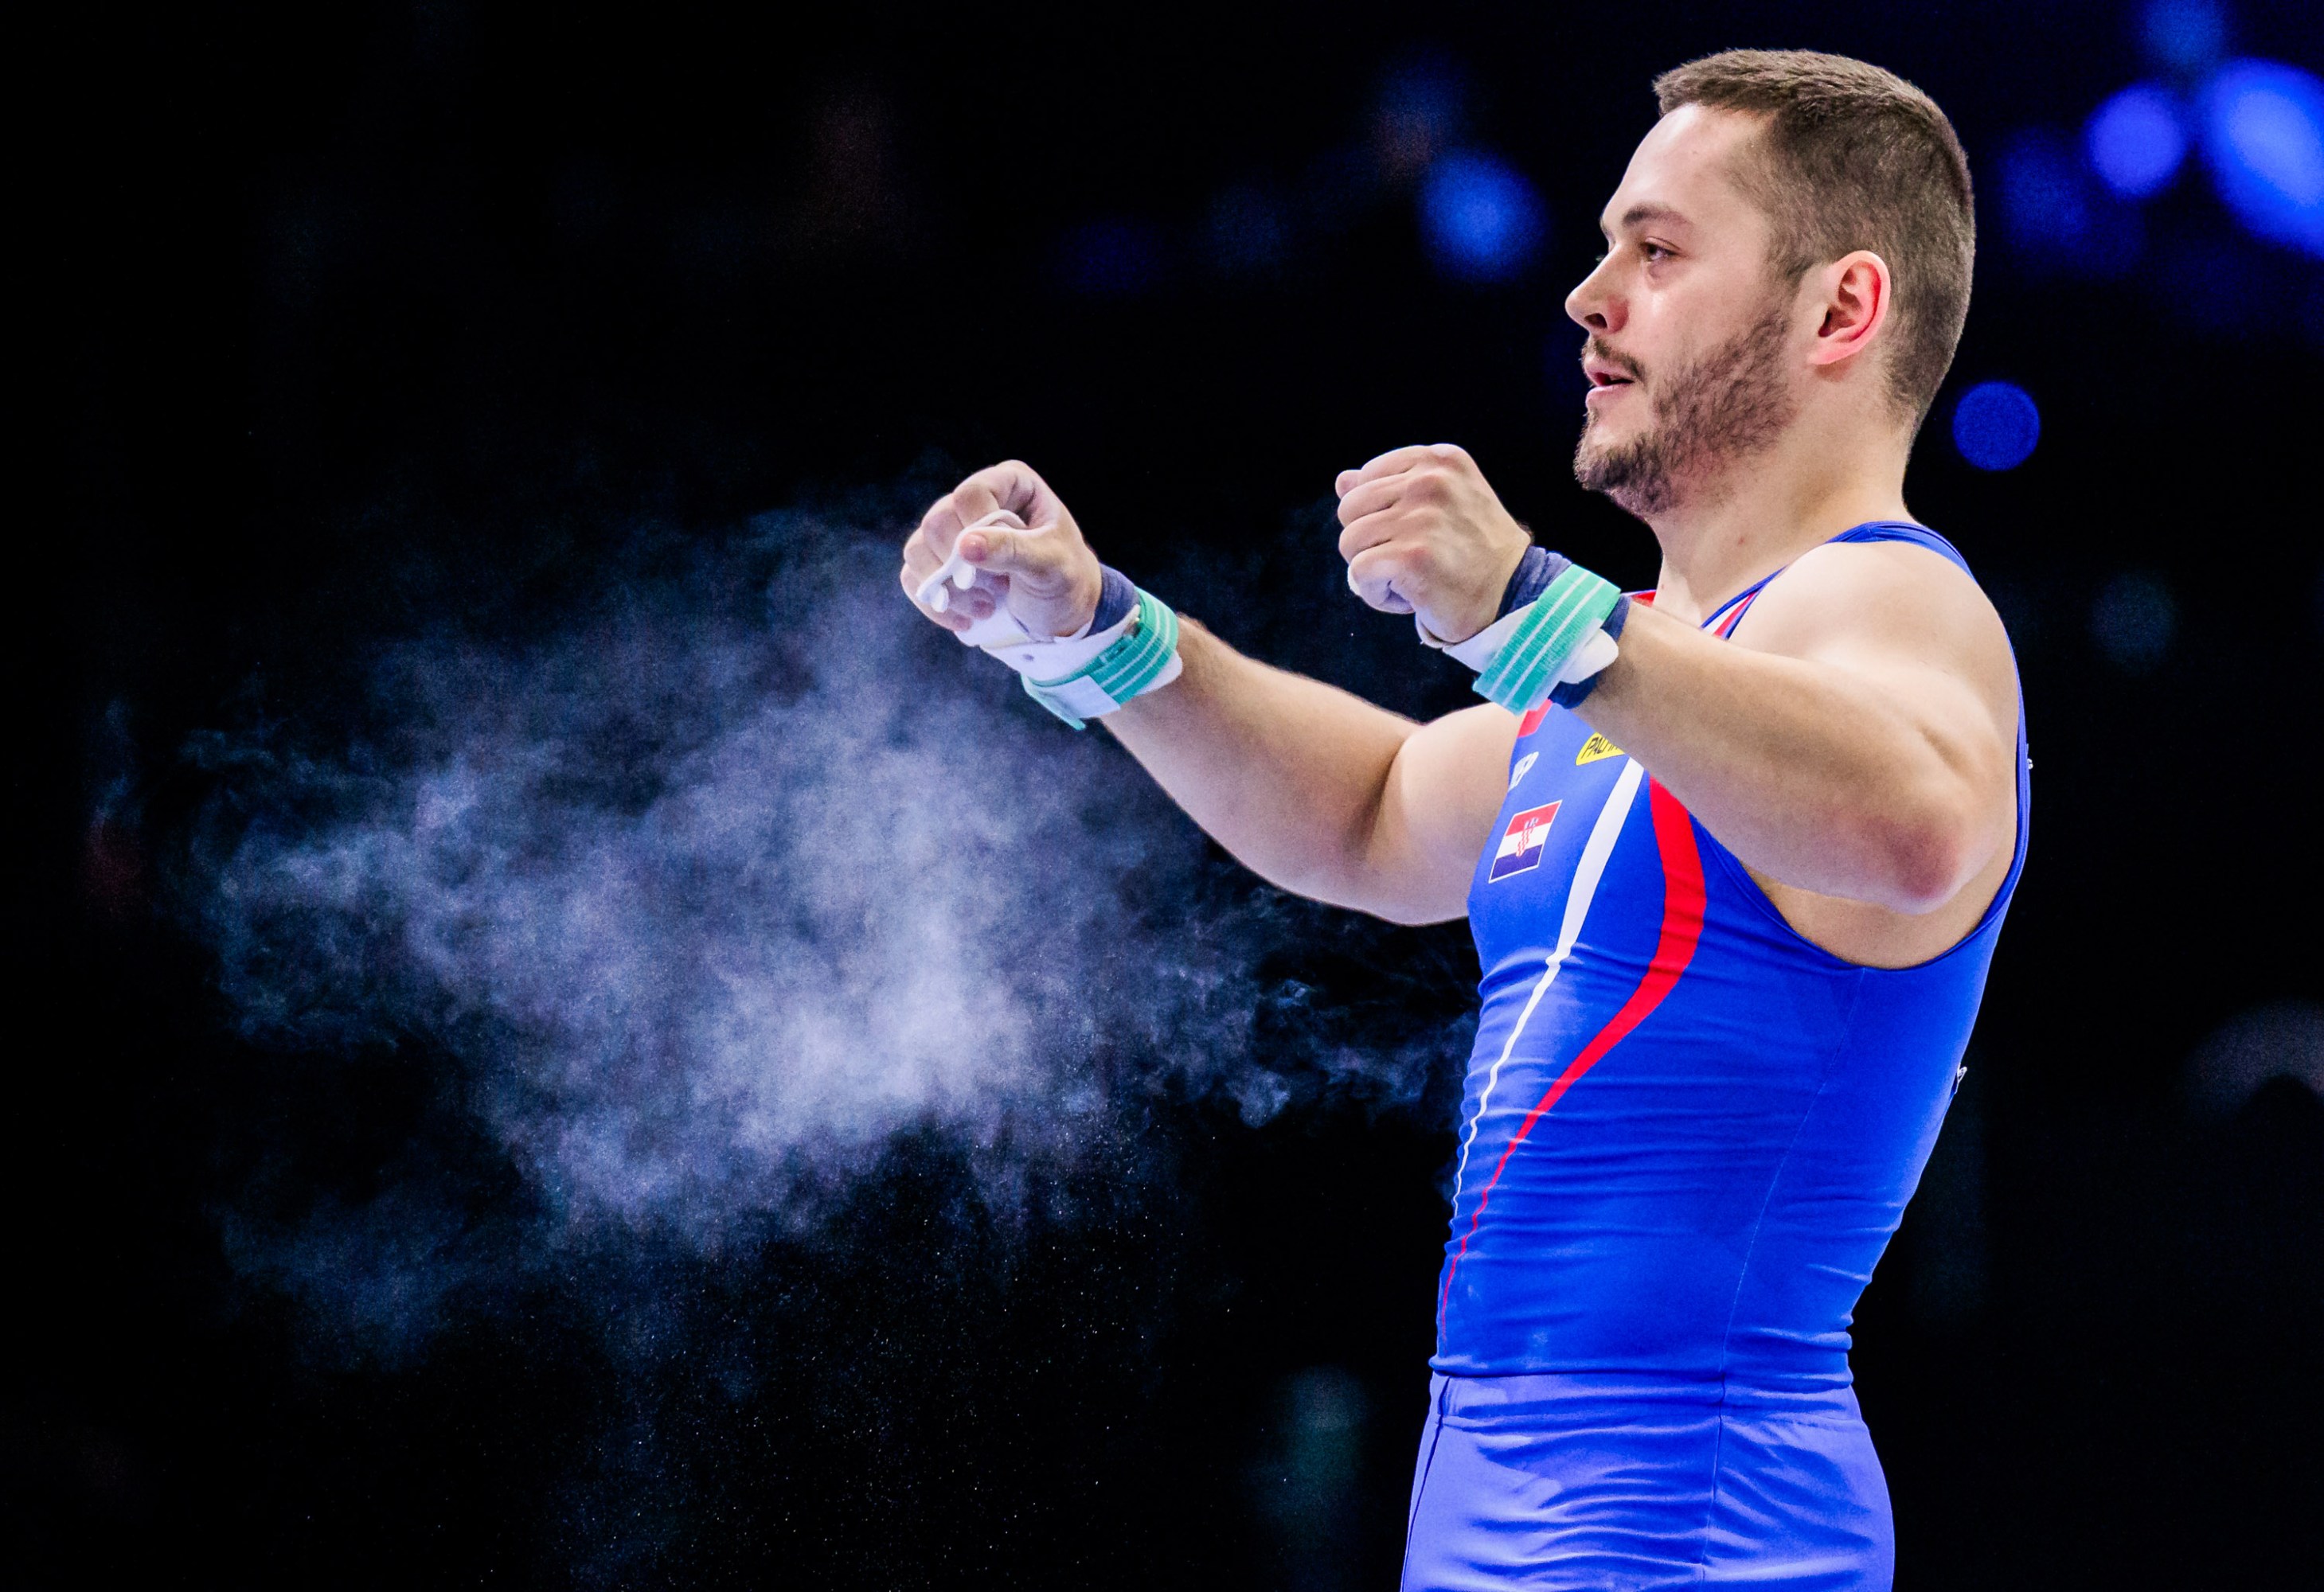 Tin Srbic pumping his arms, which has produced a cloud of chalk dust in the arm in front of him